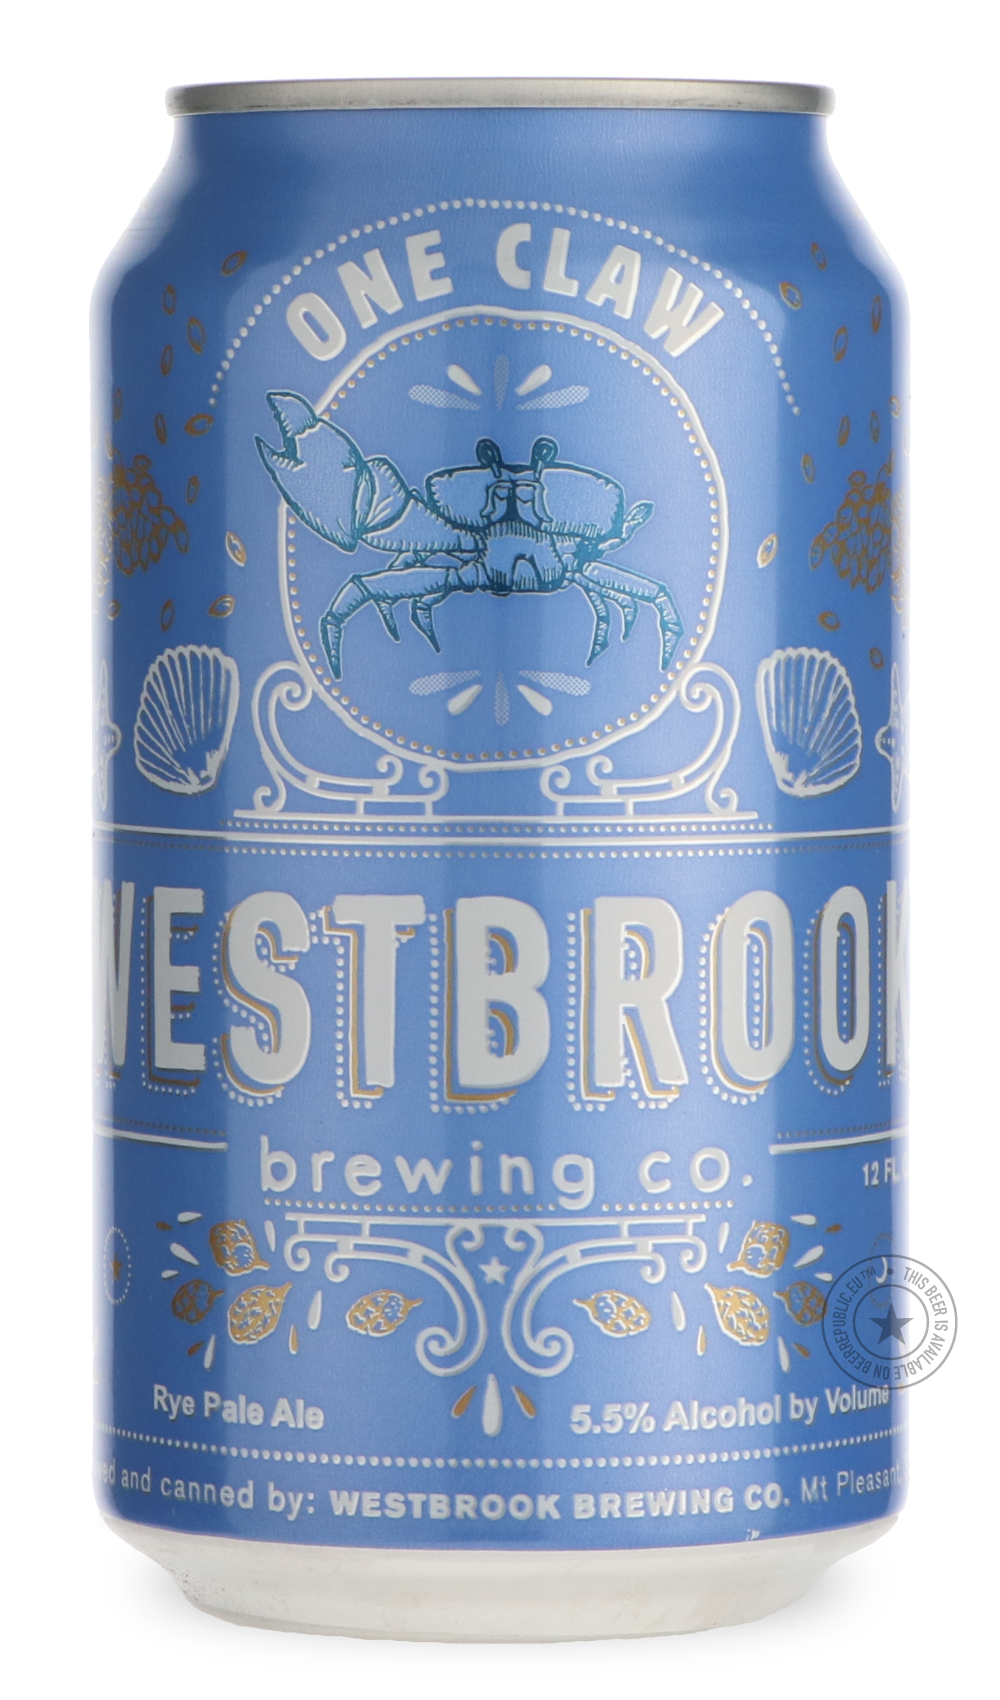 -Westbrook- One Claw-Pale- Only @ Beer Republic - The best online beer store for American & Canadian craft beer - Buy beer online from the USA and Canada - Bier online kopen - Amerikaans bier kopen - Craft beer store - Craft beer kopen - Amerikanisch bier kaufen - Bier online kaufen - Acheter biere online - IPA - Stout - Porter - New England IPA - Hazy IPA - Imperial Stout - Barrel Aged - Barrel Aged Imperial Stout - Brown - Dark beer - Blond - Blonde - Pilsner - Lager - Wheat - Weizen - Amber - Barley Wine